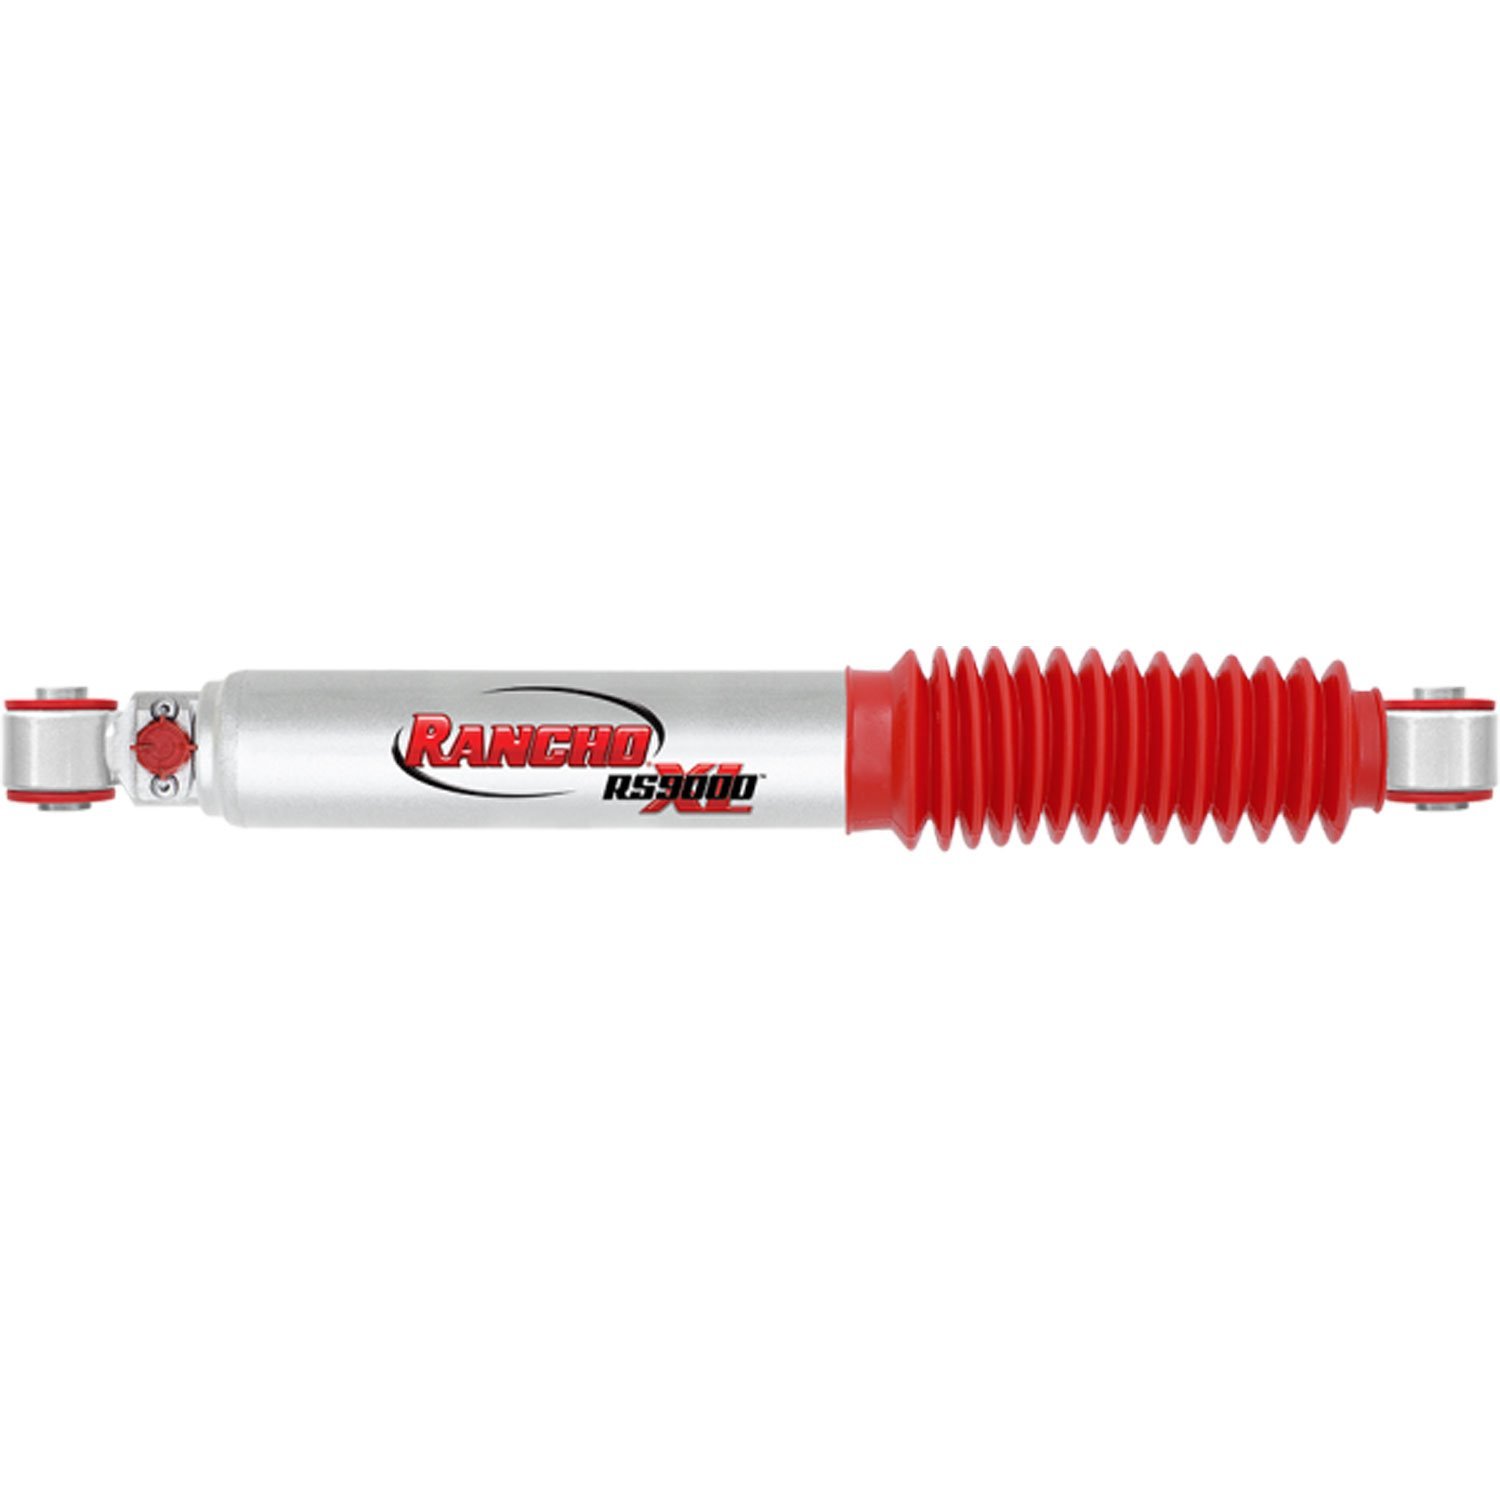 RS9000XL Rear Shock Absorber Fits Dodge Nitro and Jeep Liberty